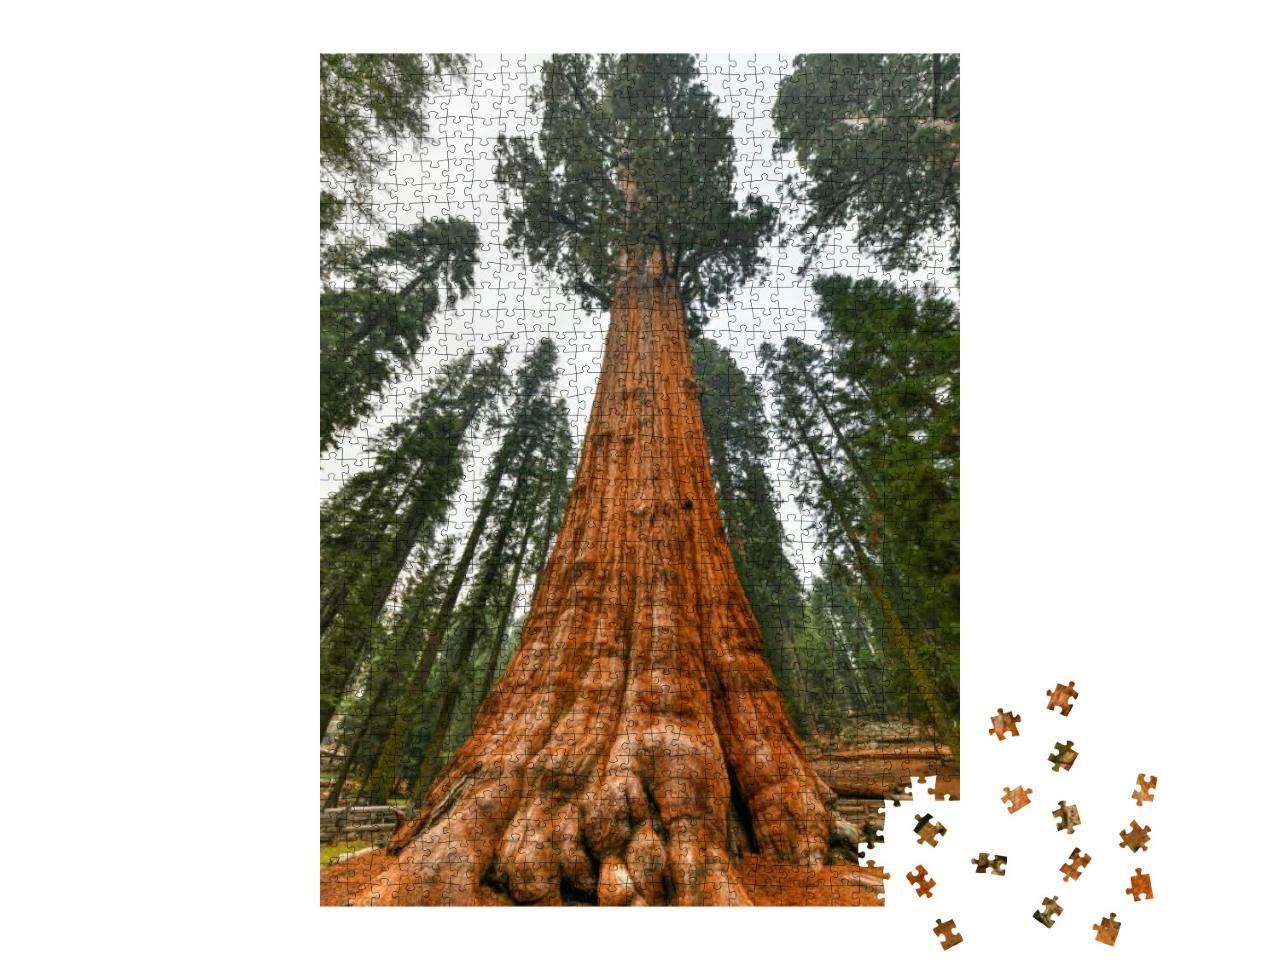 Giant Sequoia Tree - General Sherman in Sequoia National... Jigsaw Puzzle with 1000 pieces